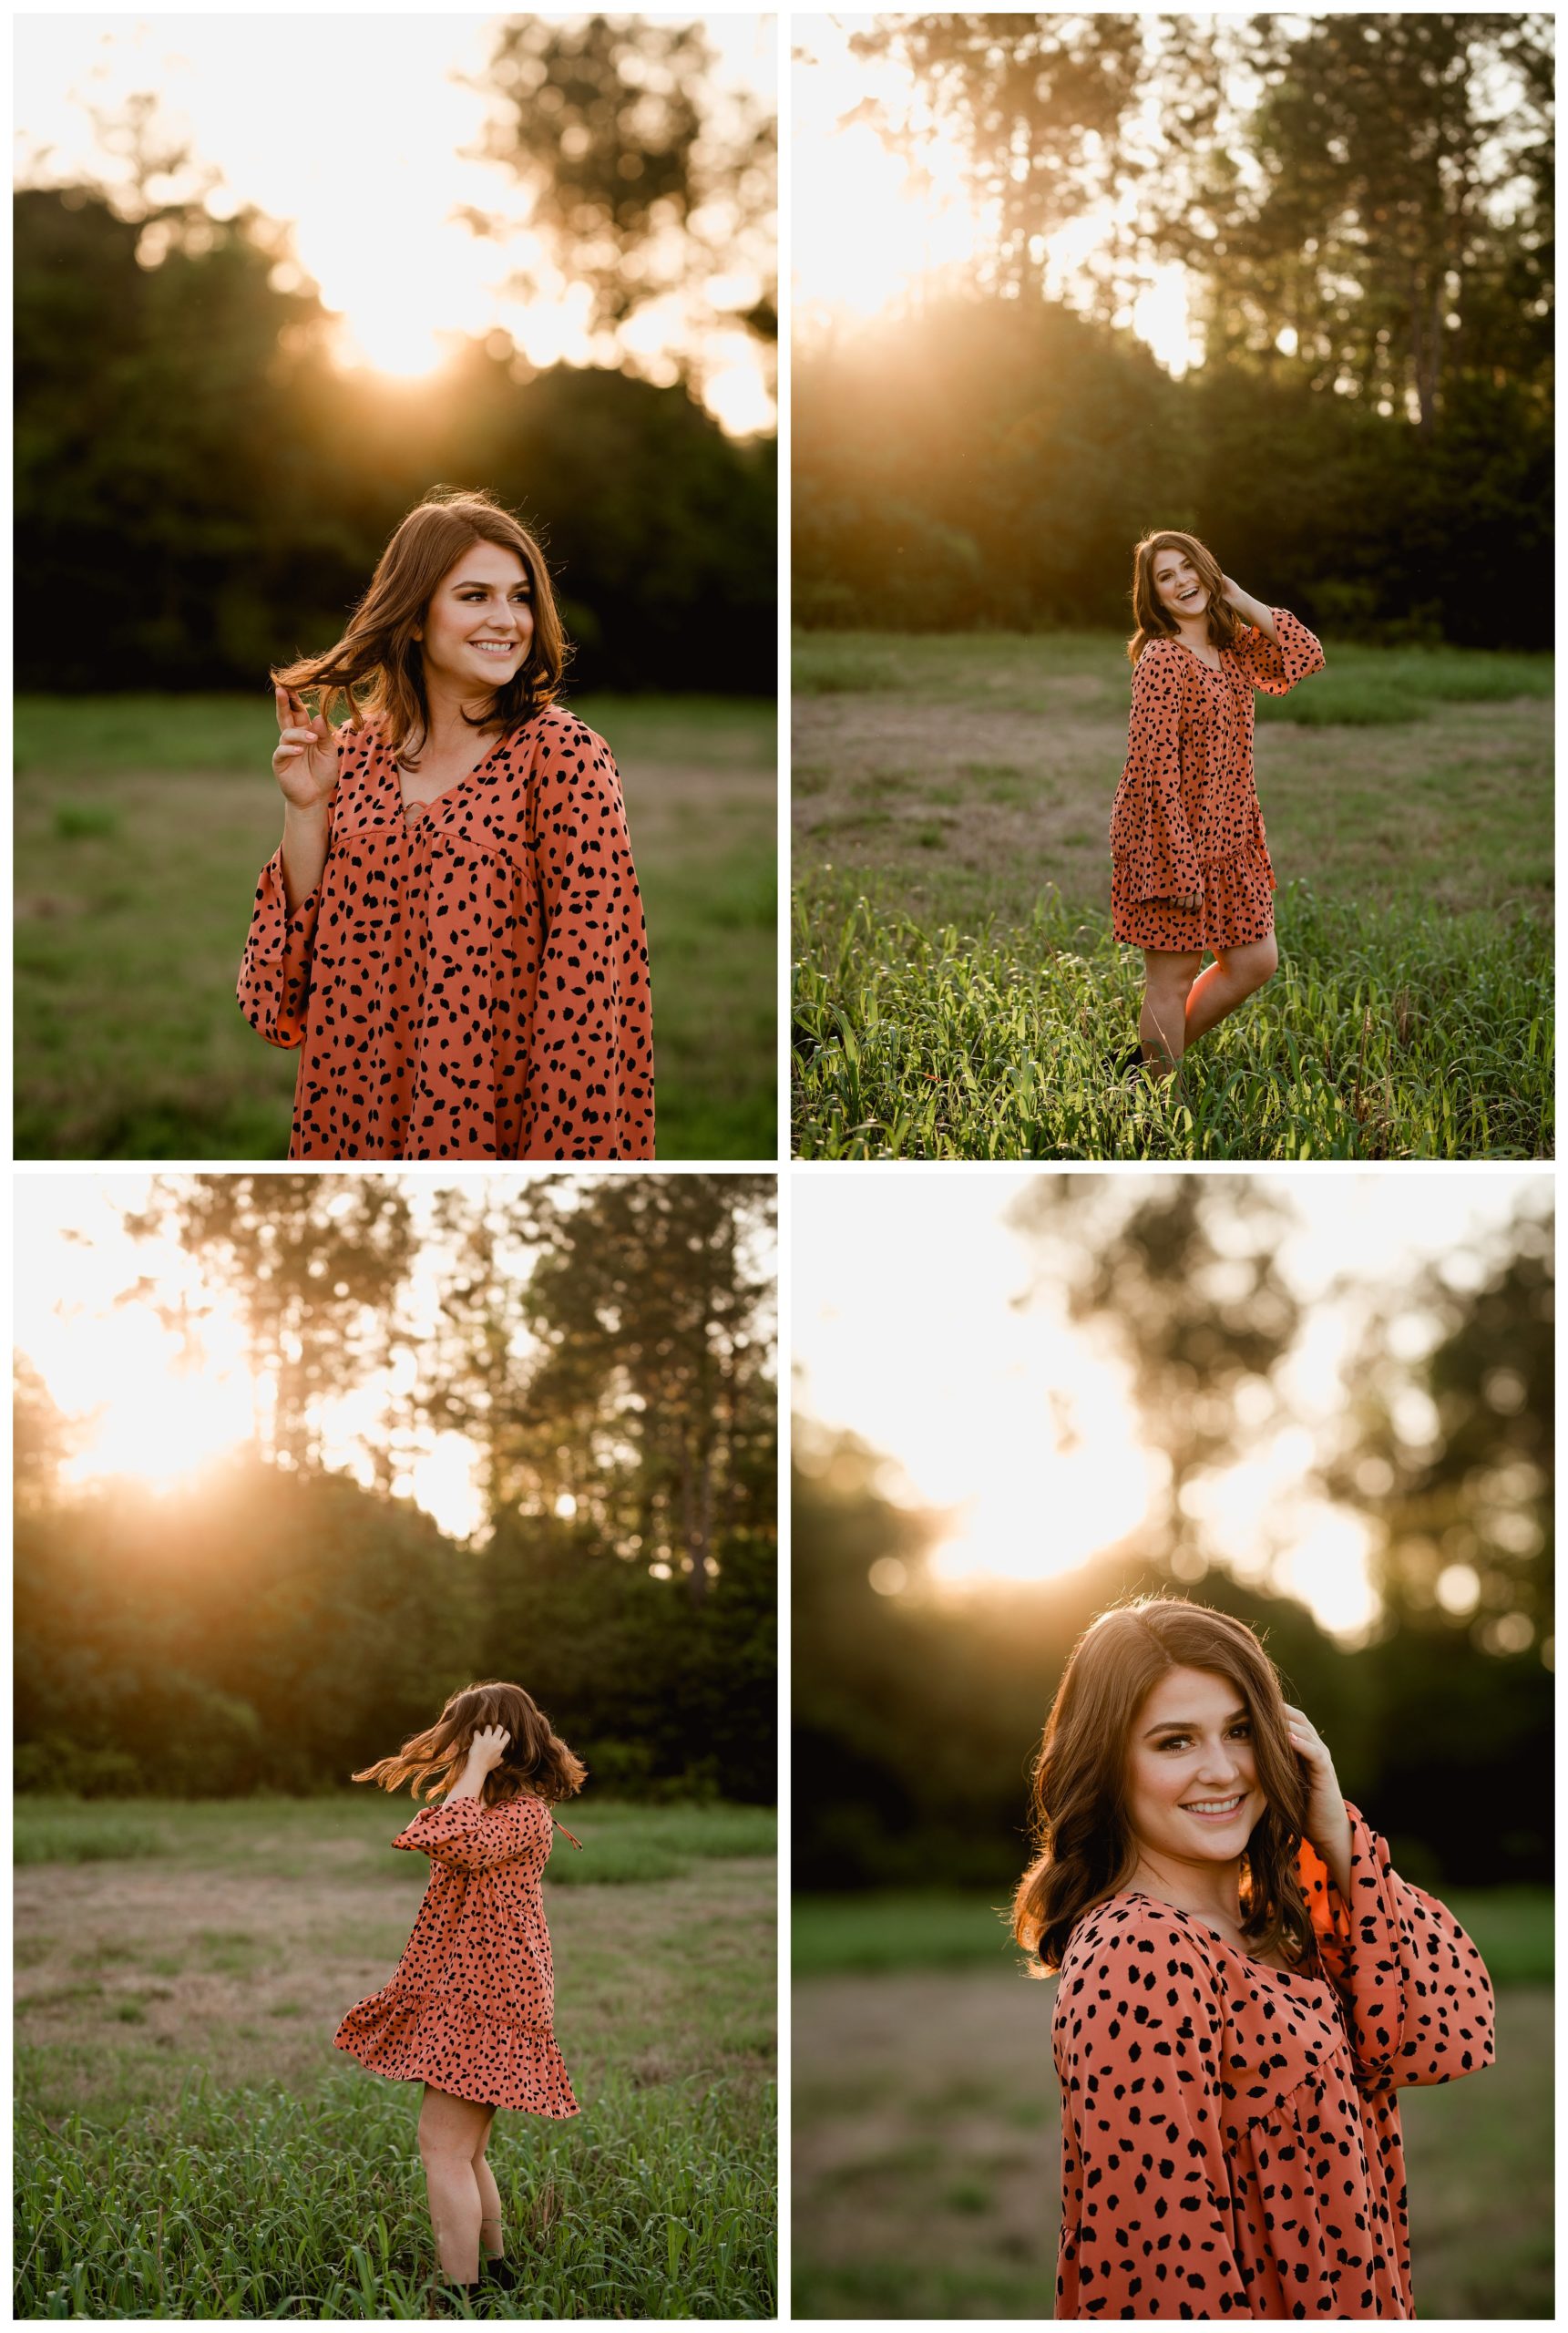 Posing ideas for girls during the sunset